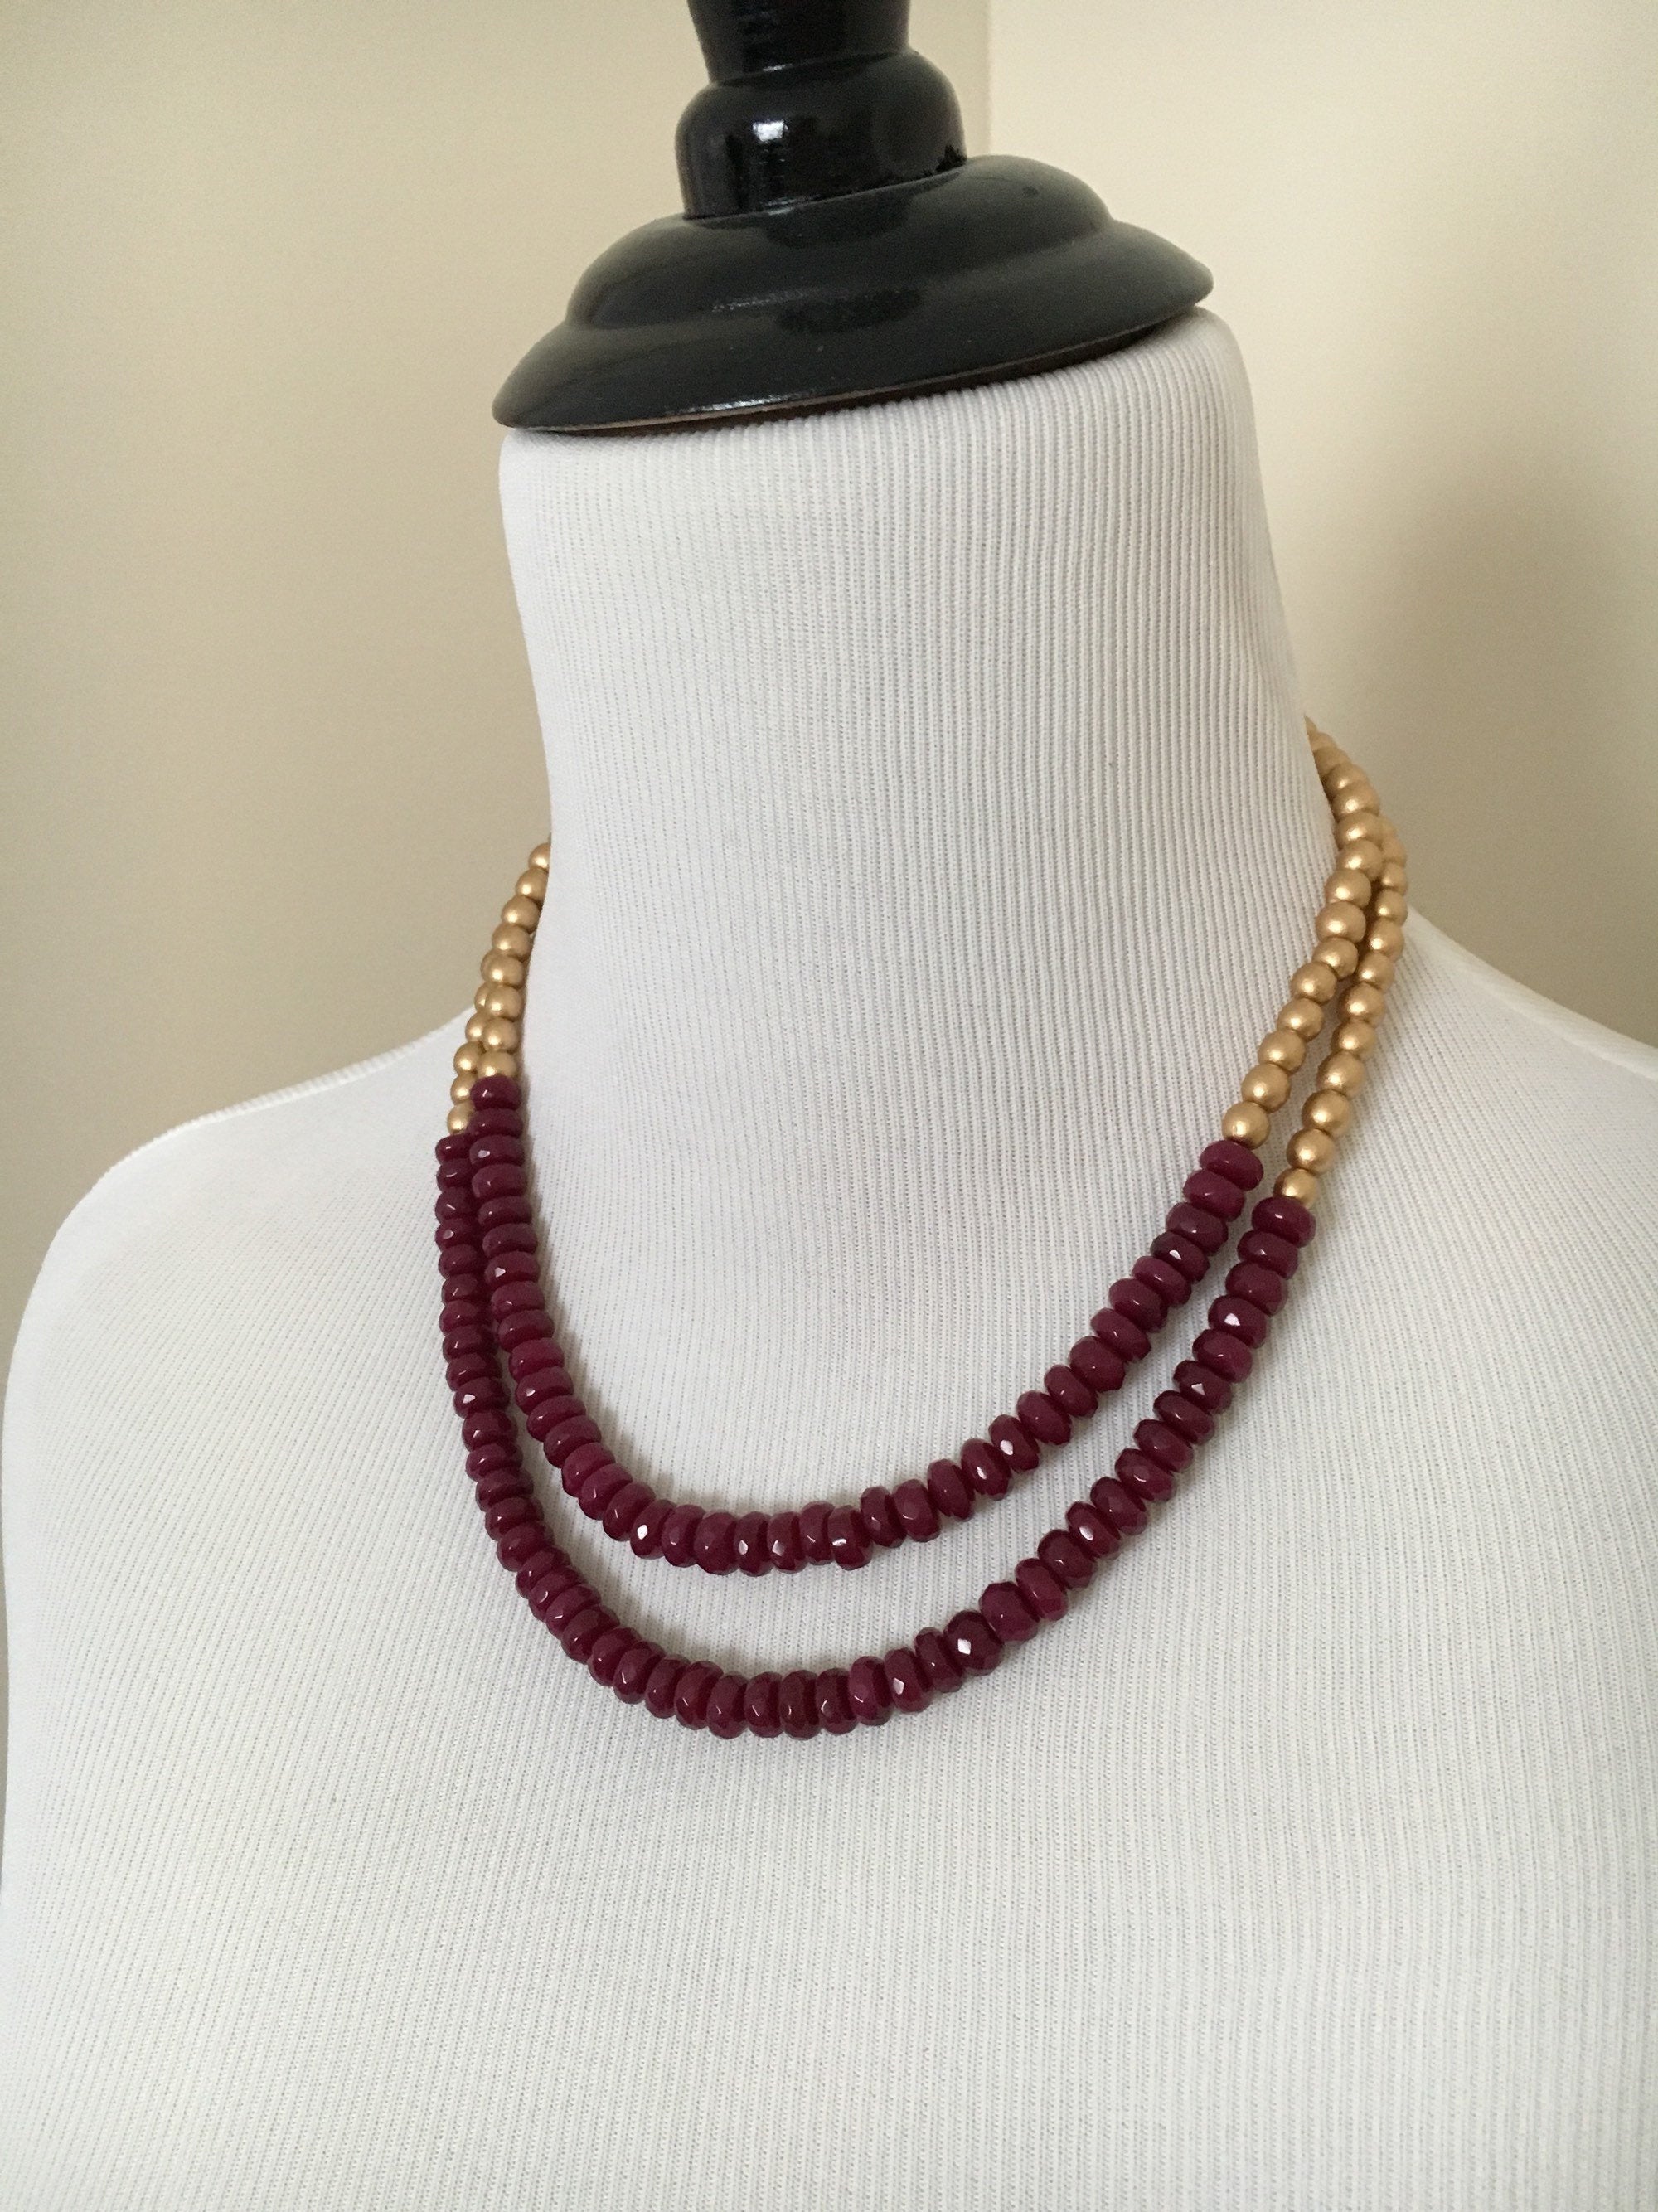 Mannequin wearing Two Stranded Pink and Gold Statement Necklace from the side.